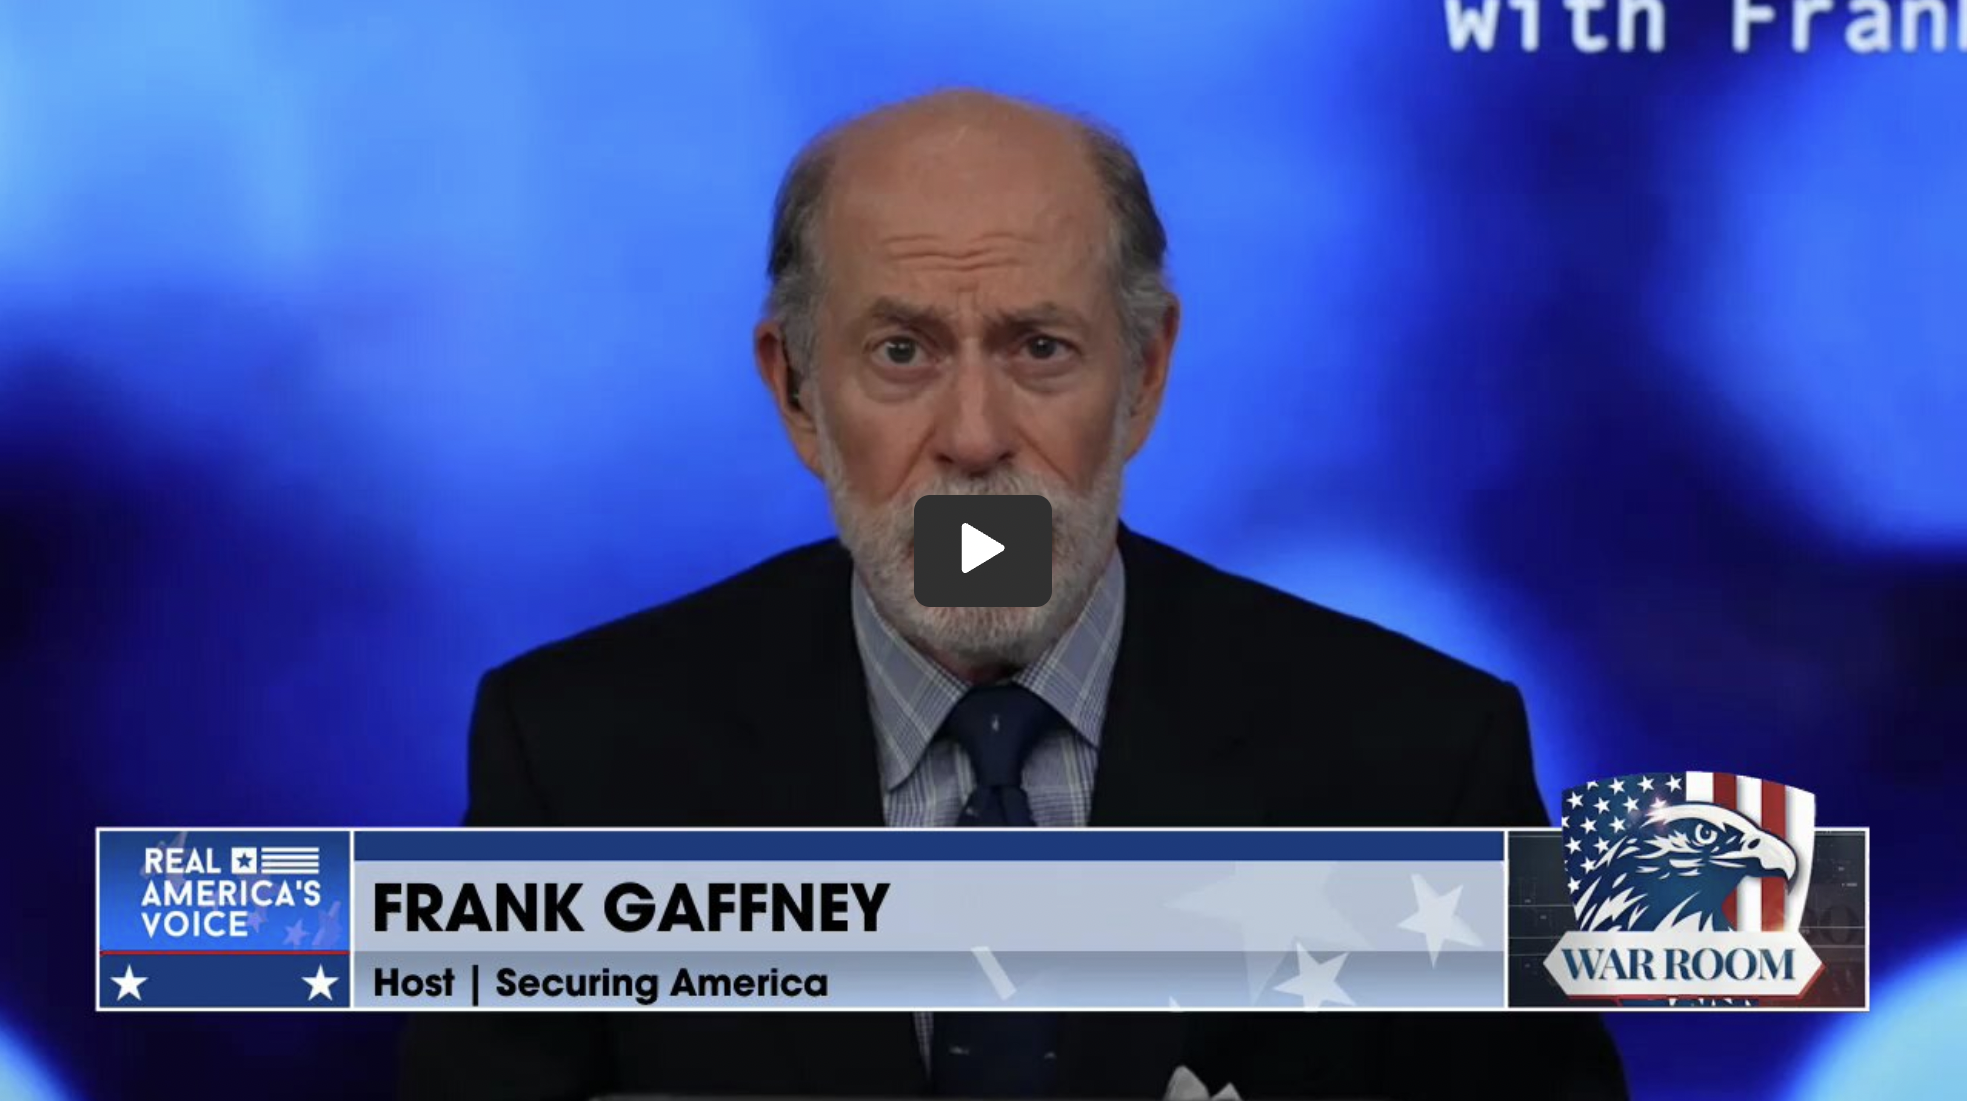 Frank Gaffney Warns Of Rising Military Leadings Infecting Our Armed Forces With "Cultural Marxism"